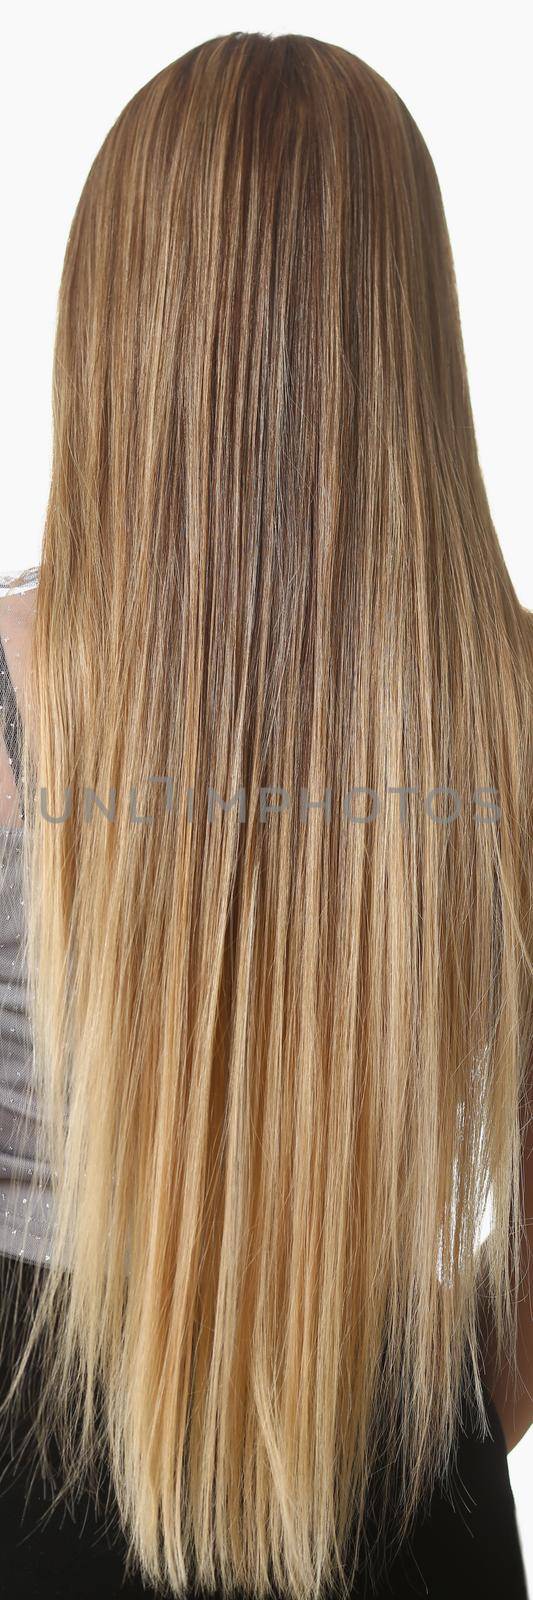 Womans back and long luxury shiny blonde hair, female after beauty salon by kuprevich